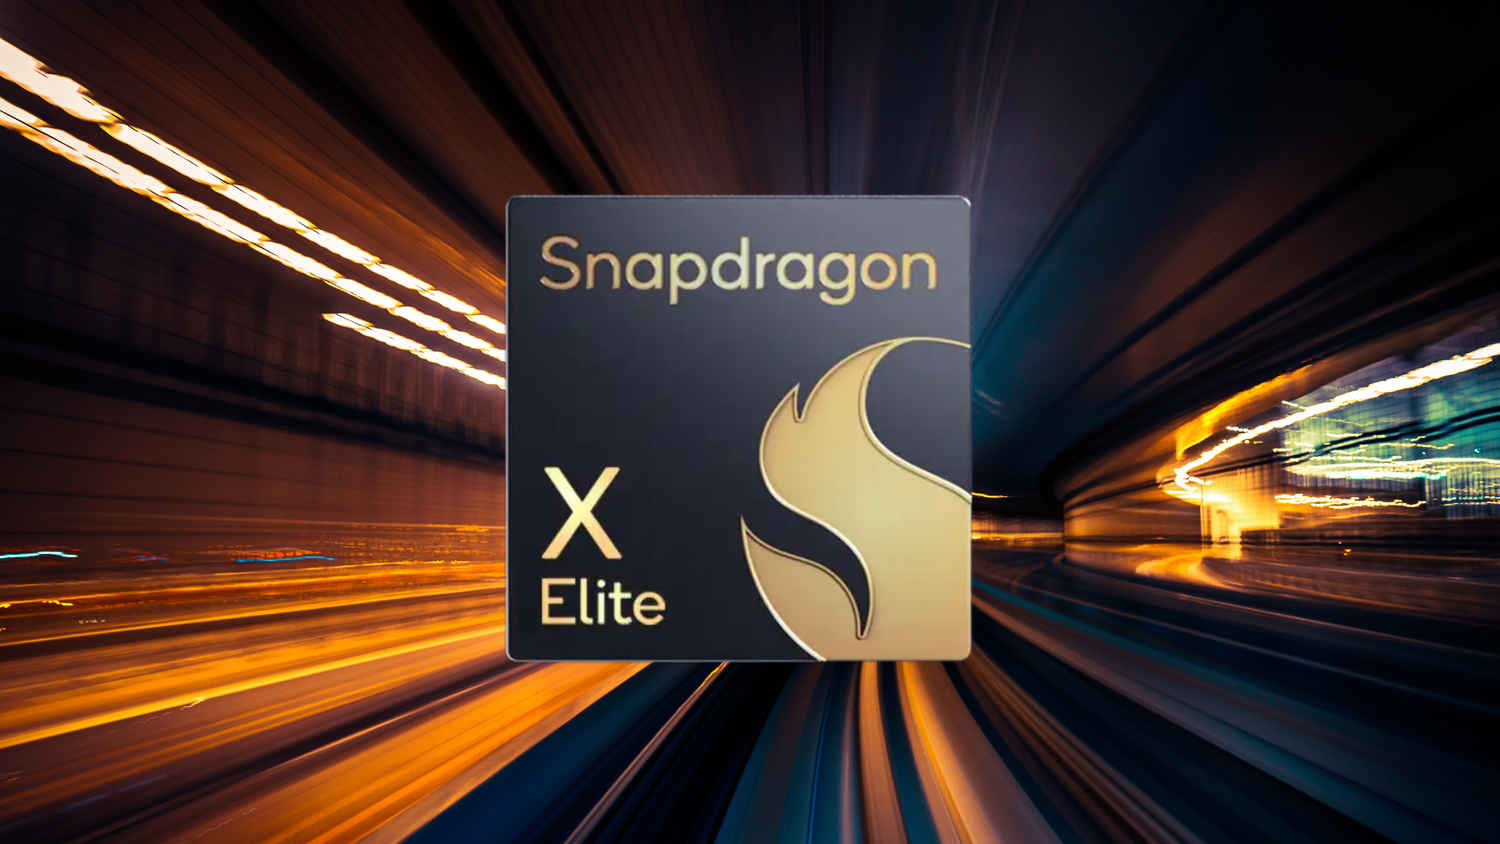 Snapdragon X Series chips beat Apple, AMD, and Intel chips: Report